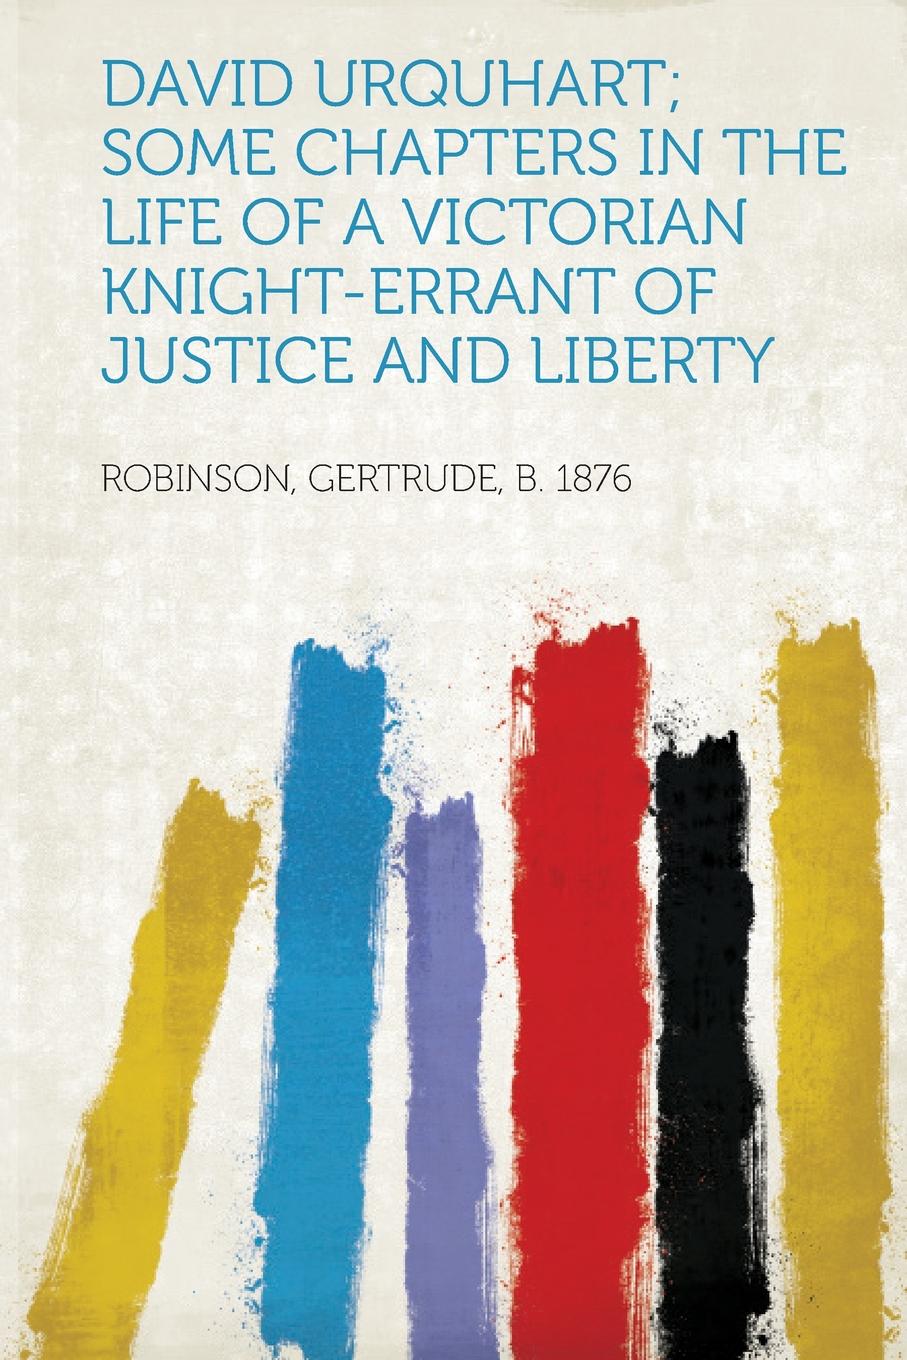 David Urquhart; Some Chapters in the Life of a Victorian Knight-Errant of Justice and Liberty